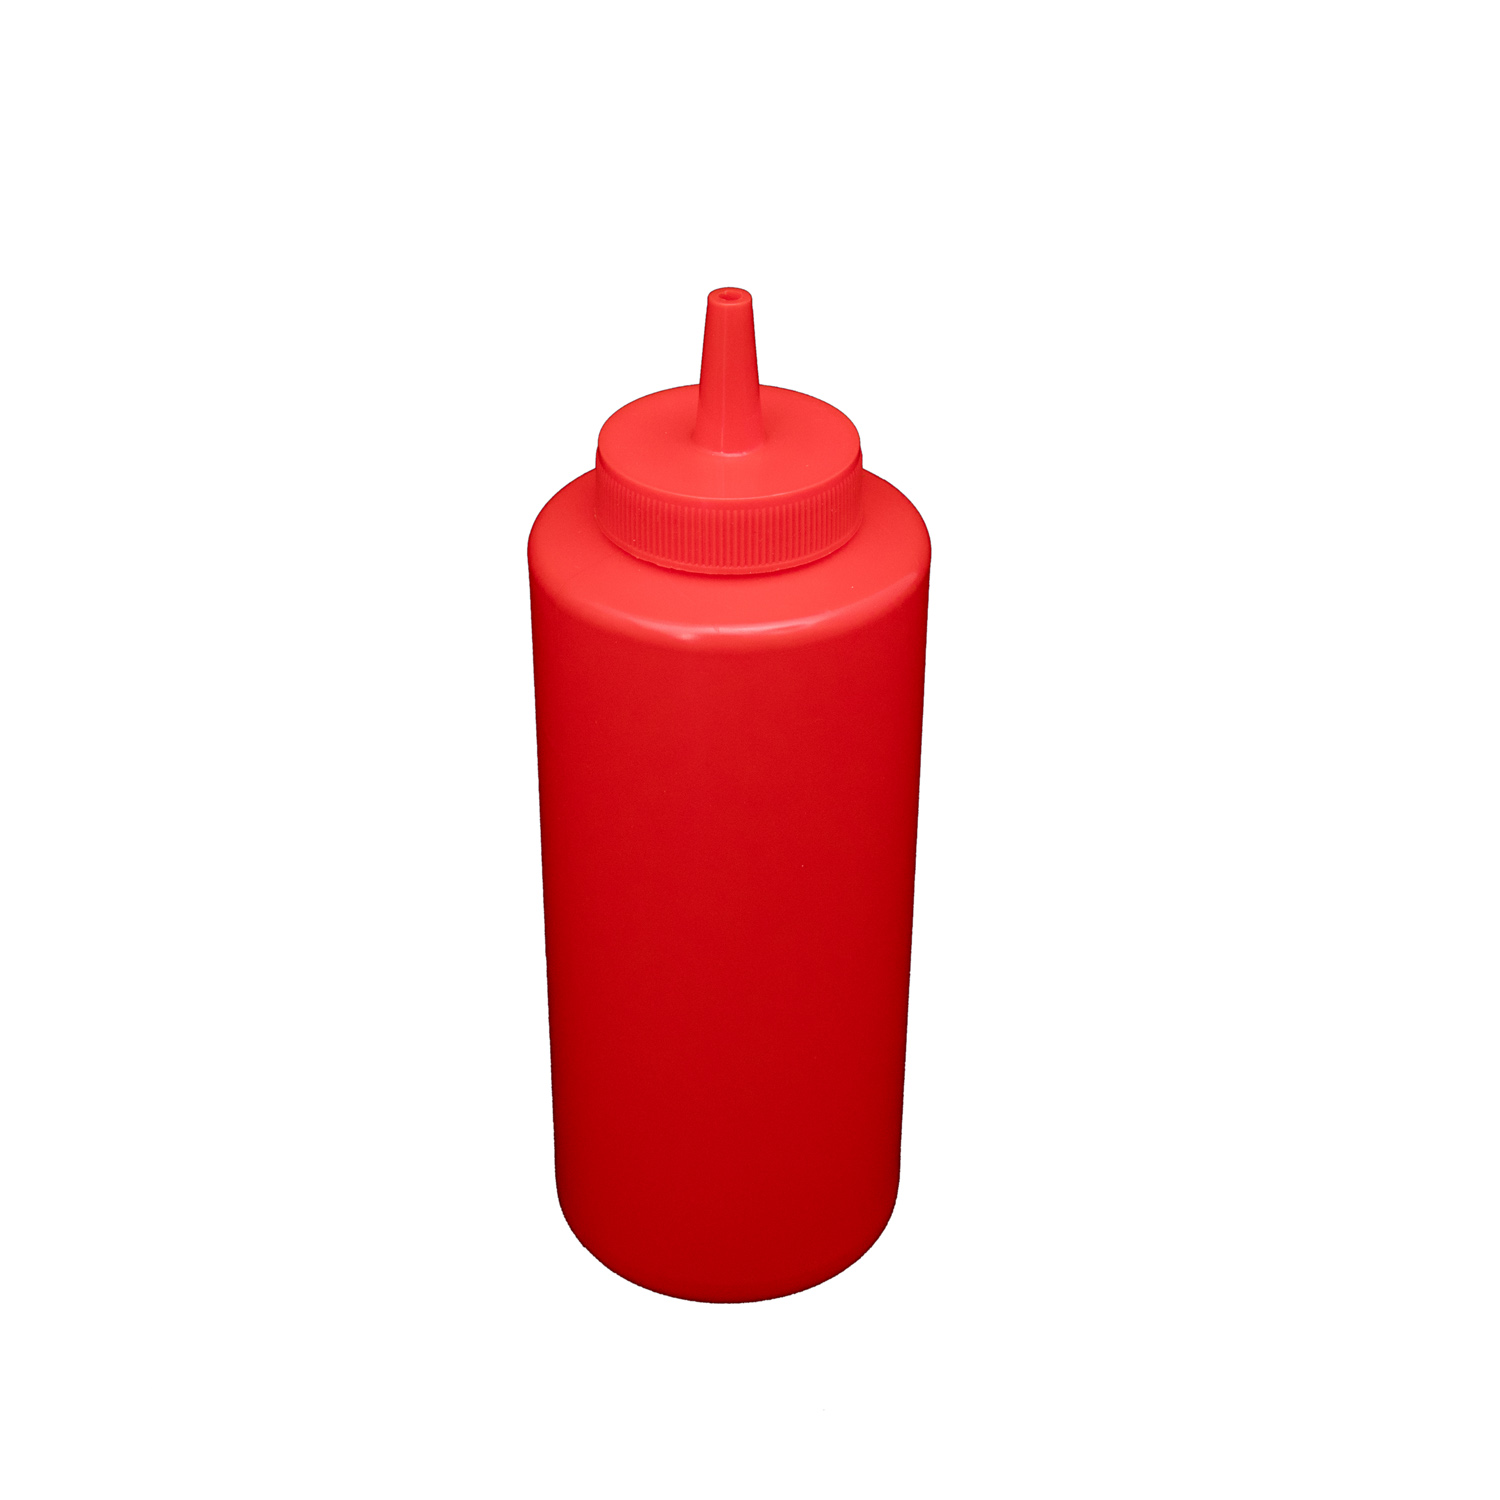 CAC China SQBT-12R Red Plastic Squeeze Bottle 12 oz.